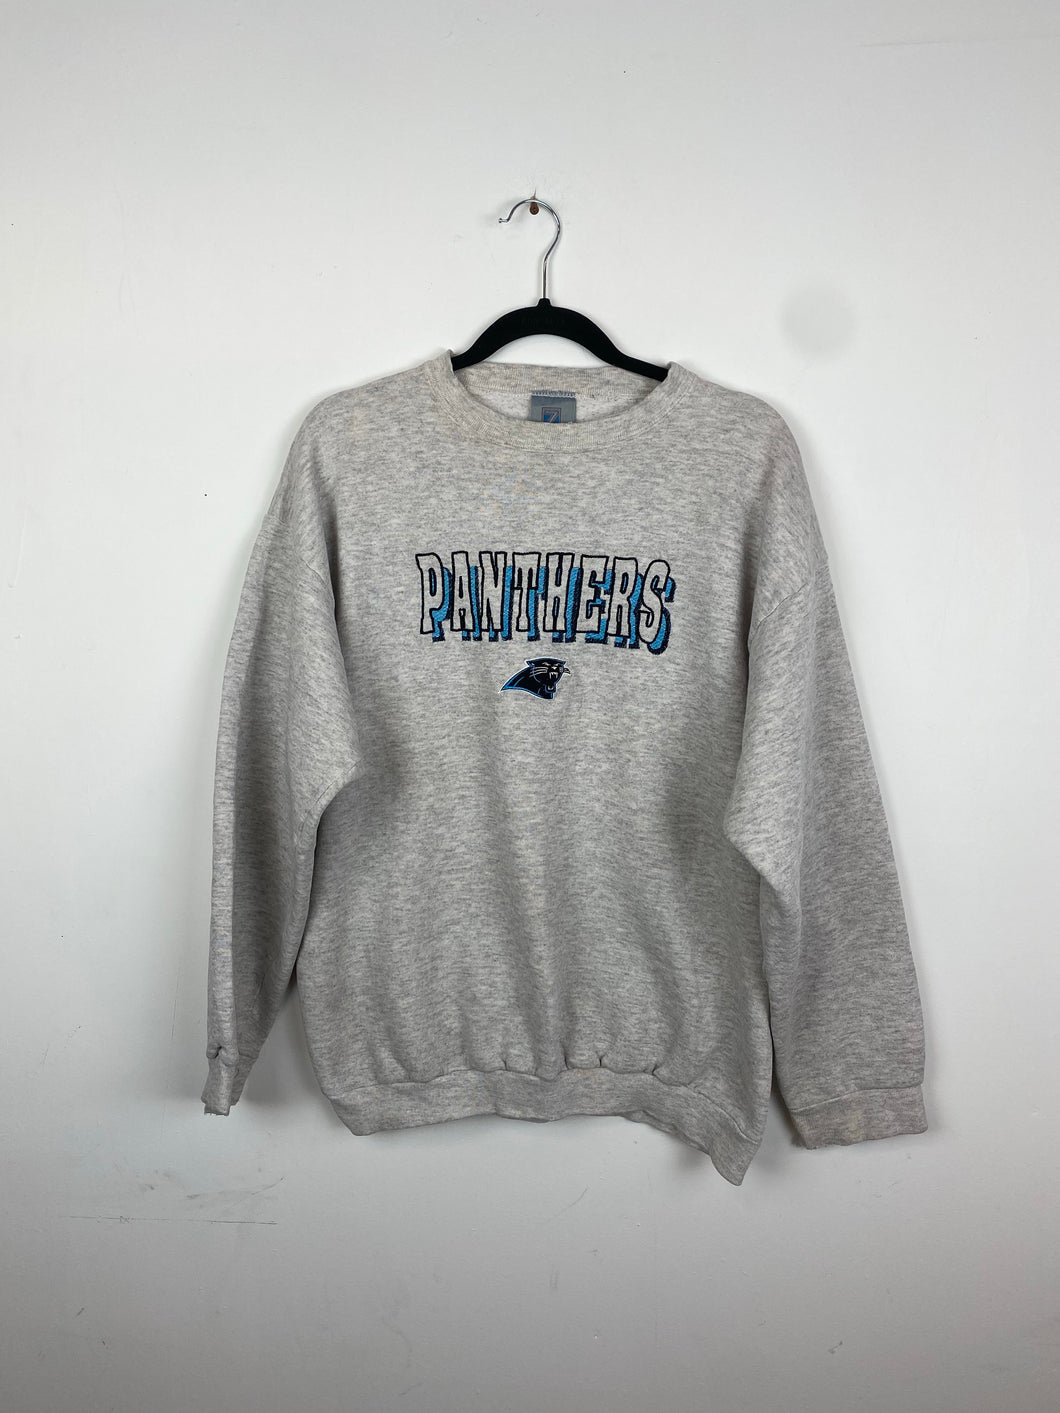 90s embroidered Panthers crewneck